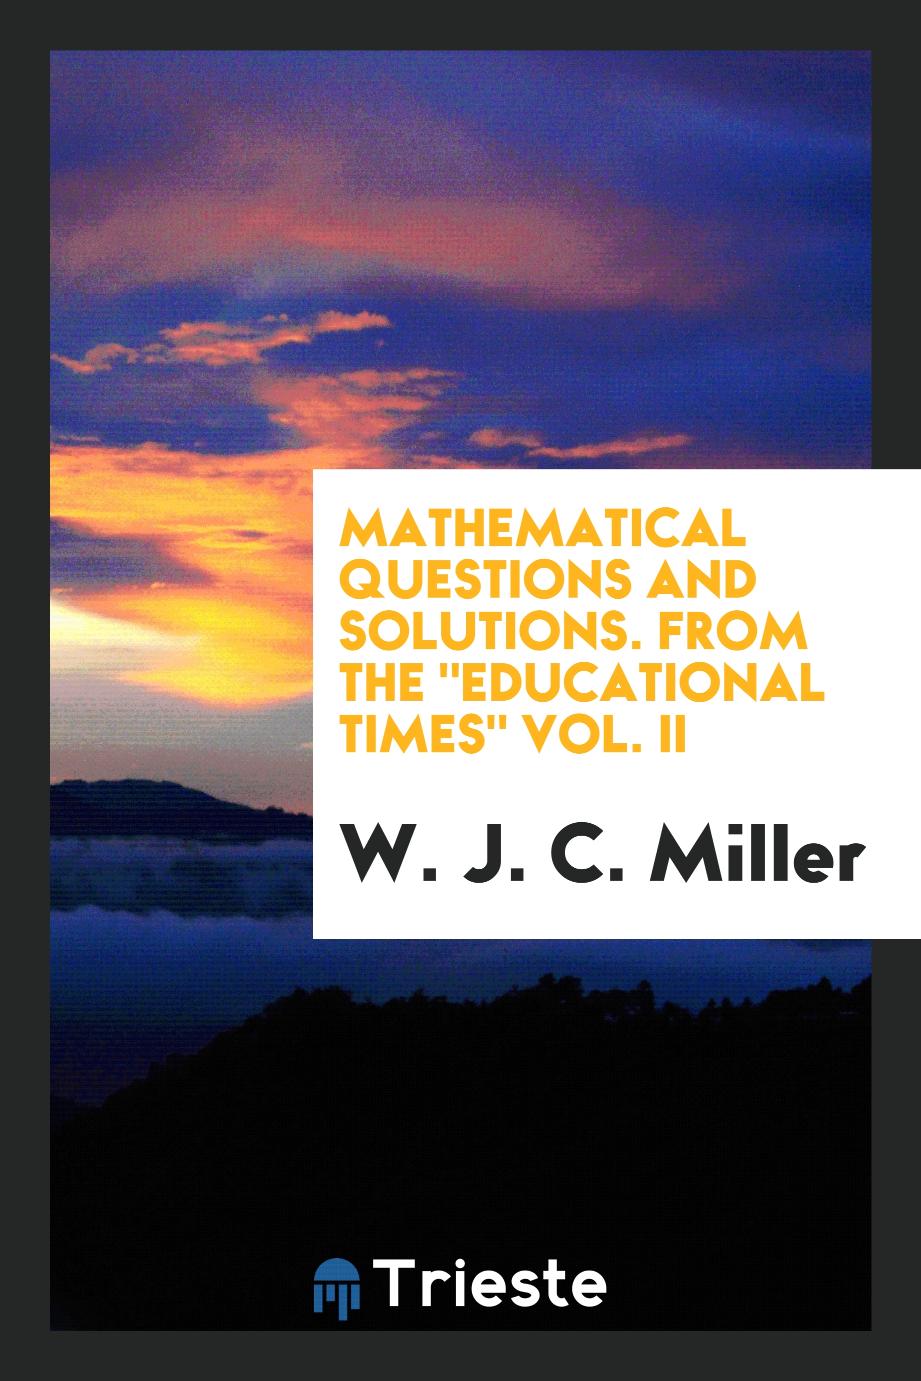 Mathematical Questions and Solutions. From the "Educational Times" Vol. II